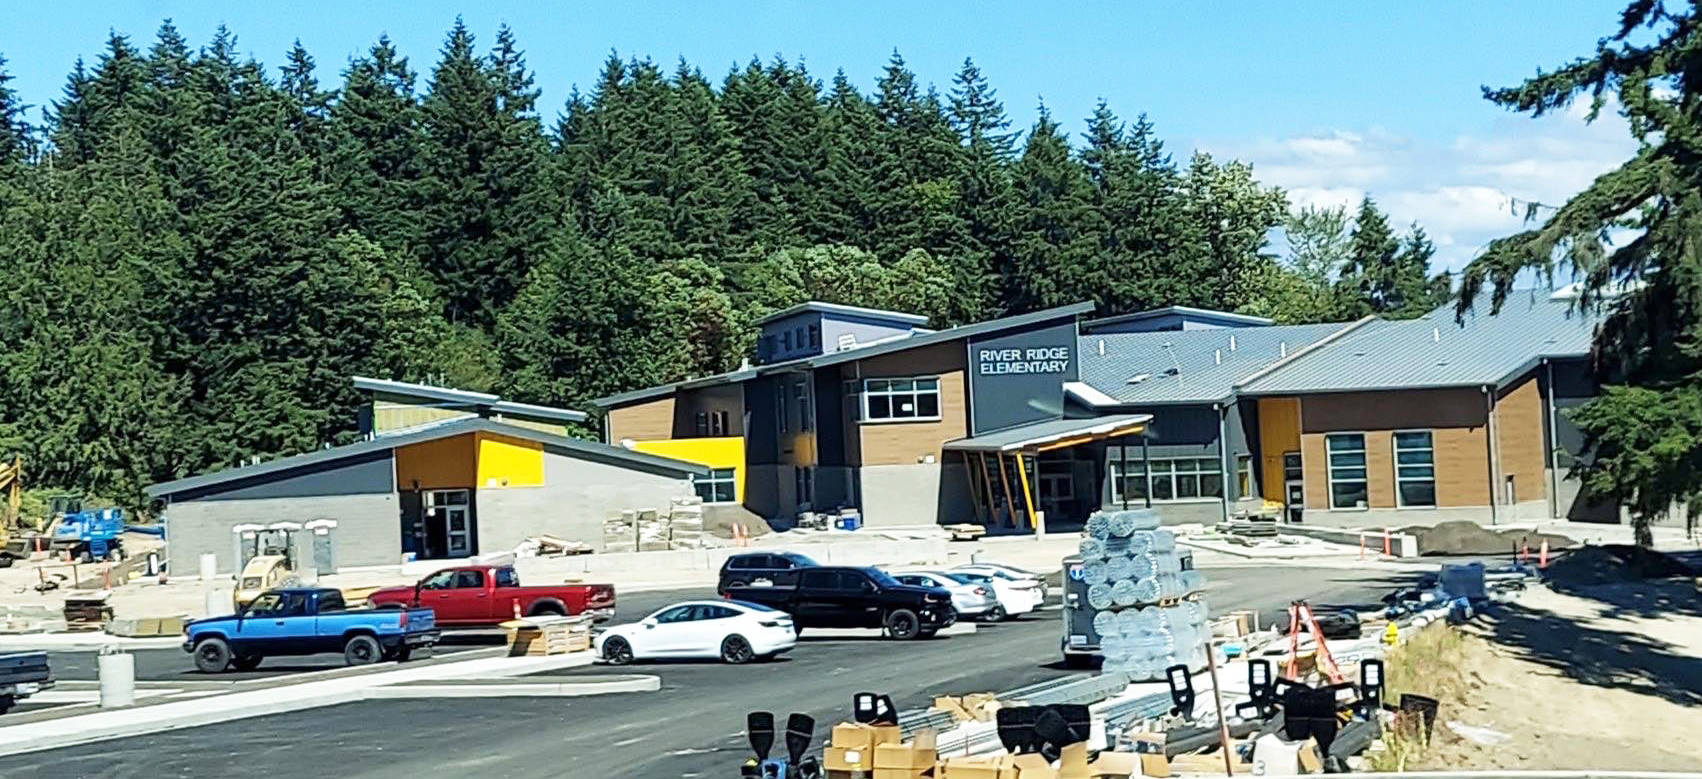 Construction continues on the new River Ridge Elementary School along Military Road South on the West Hill in SeaTac scheduled to open this fall. COURTESY PHOTO, Kent School District